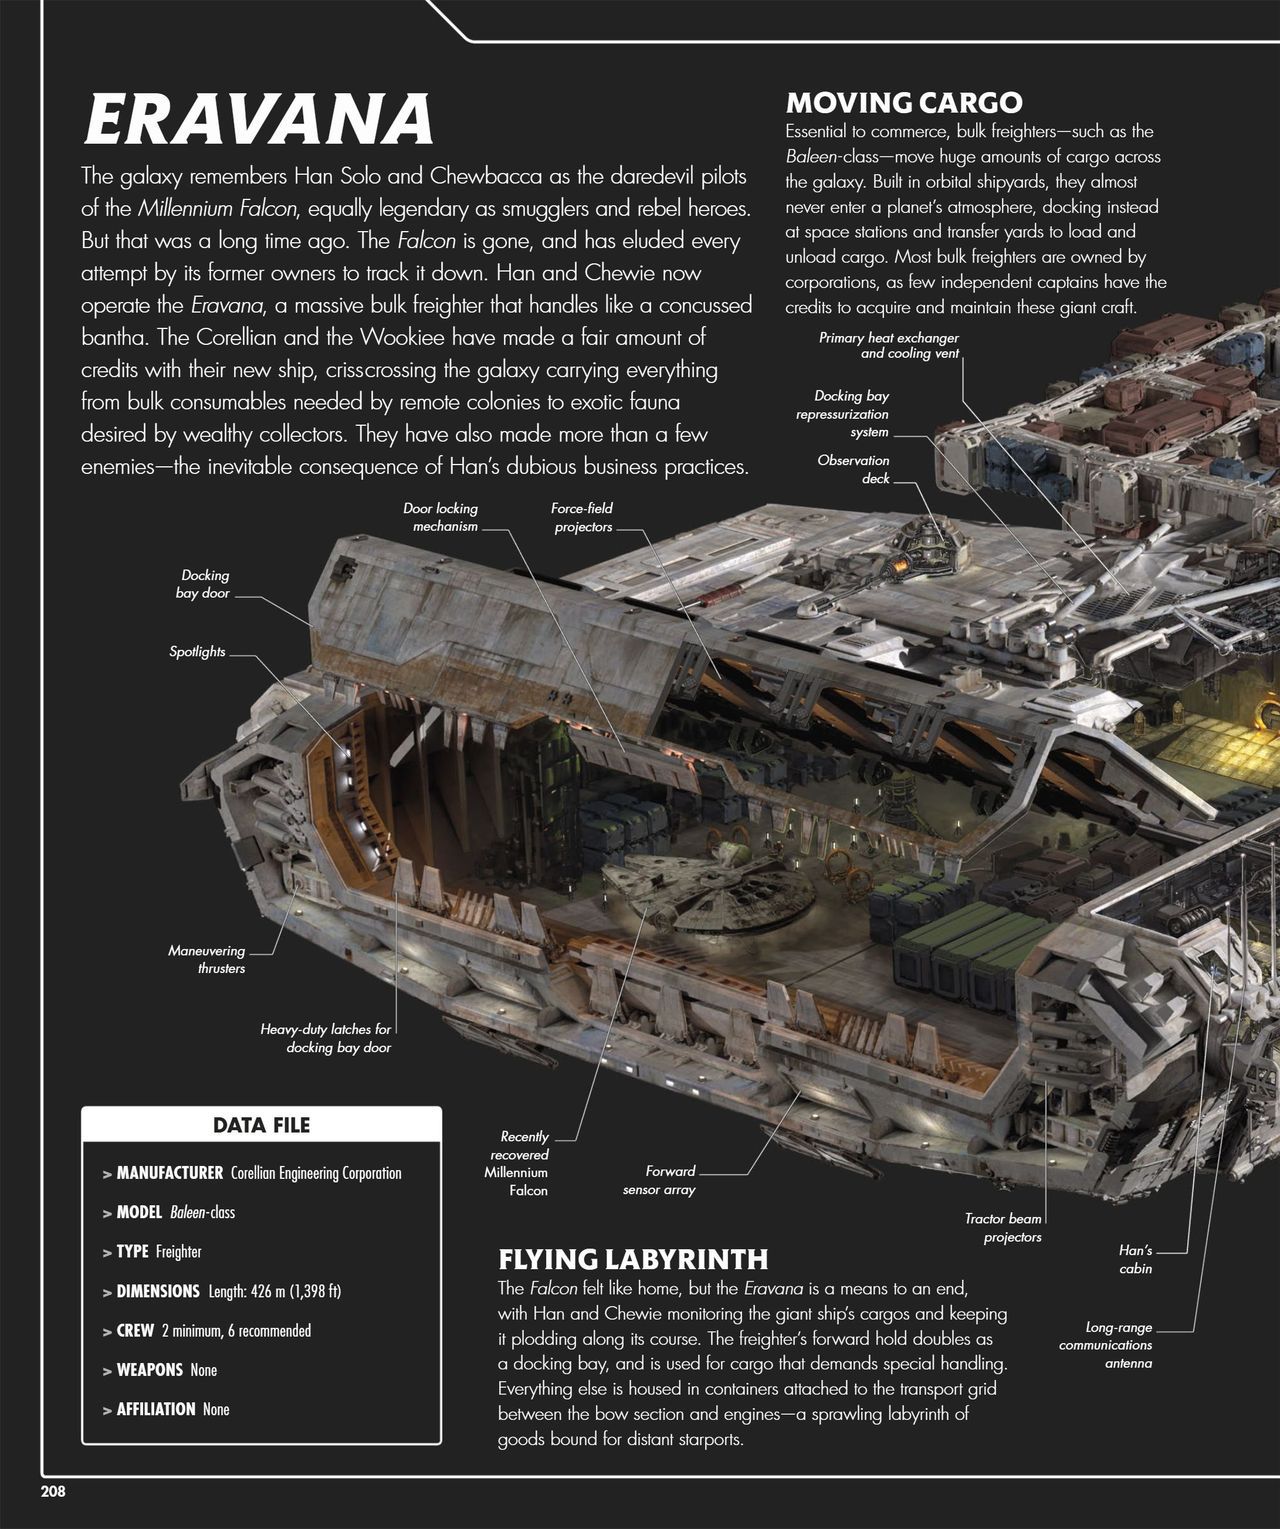 Star Wars Complete Vehicles - Incredible Cross-Sections - New Edition 209